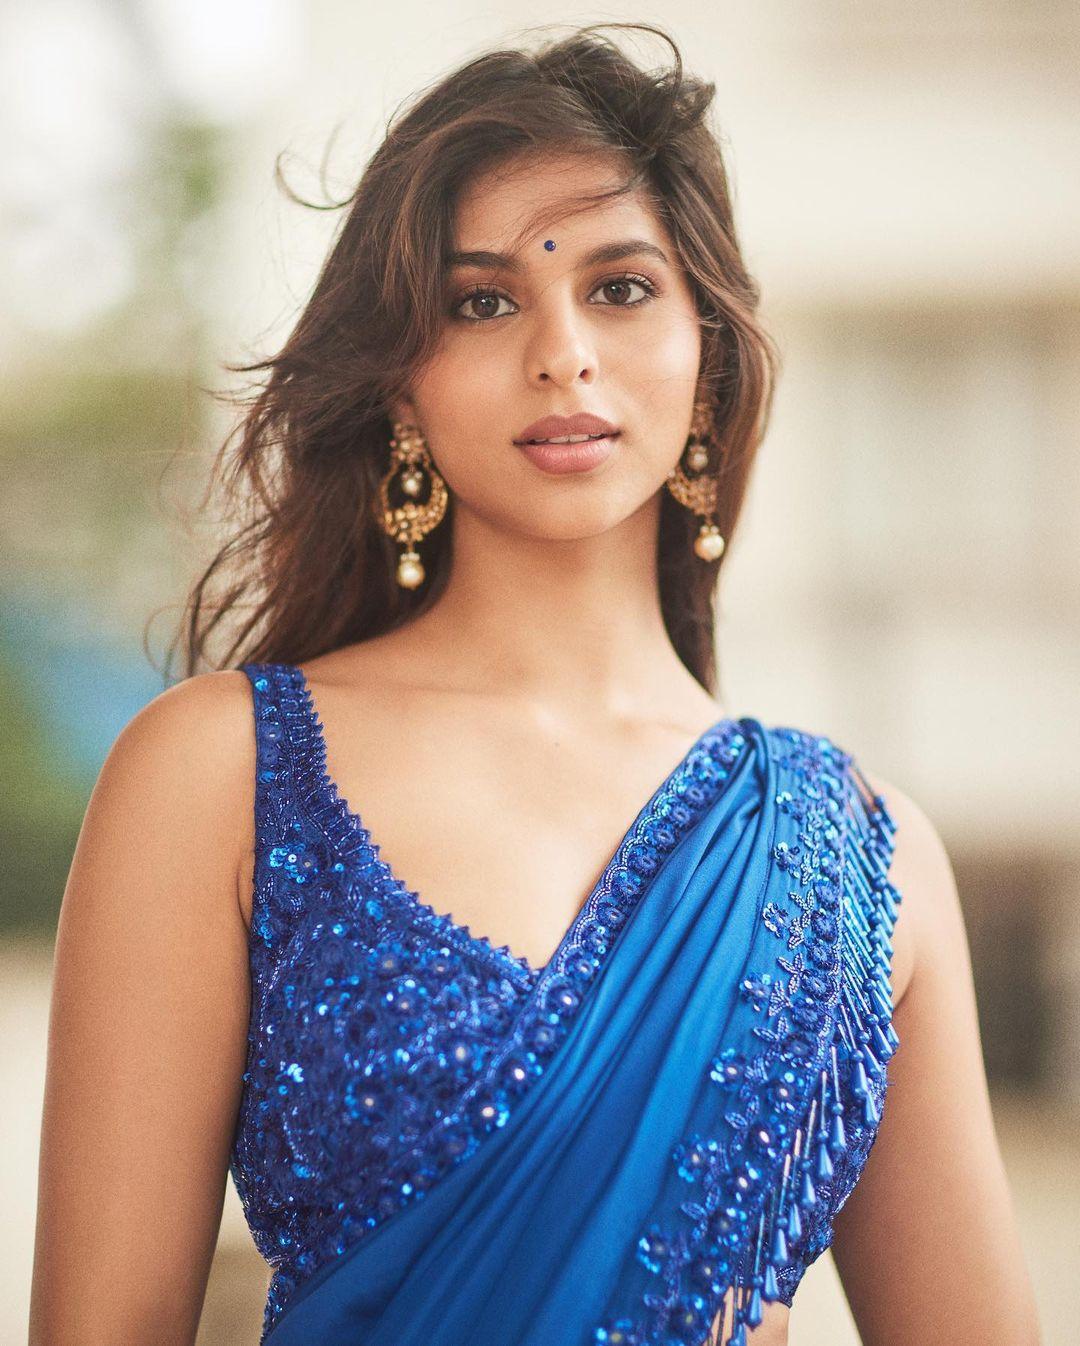 Leaving her hair open, Suhana added a sense of effortless beauty and charm to her overall 